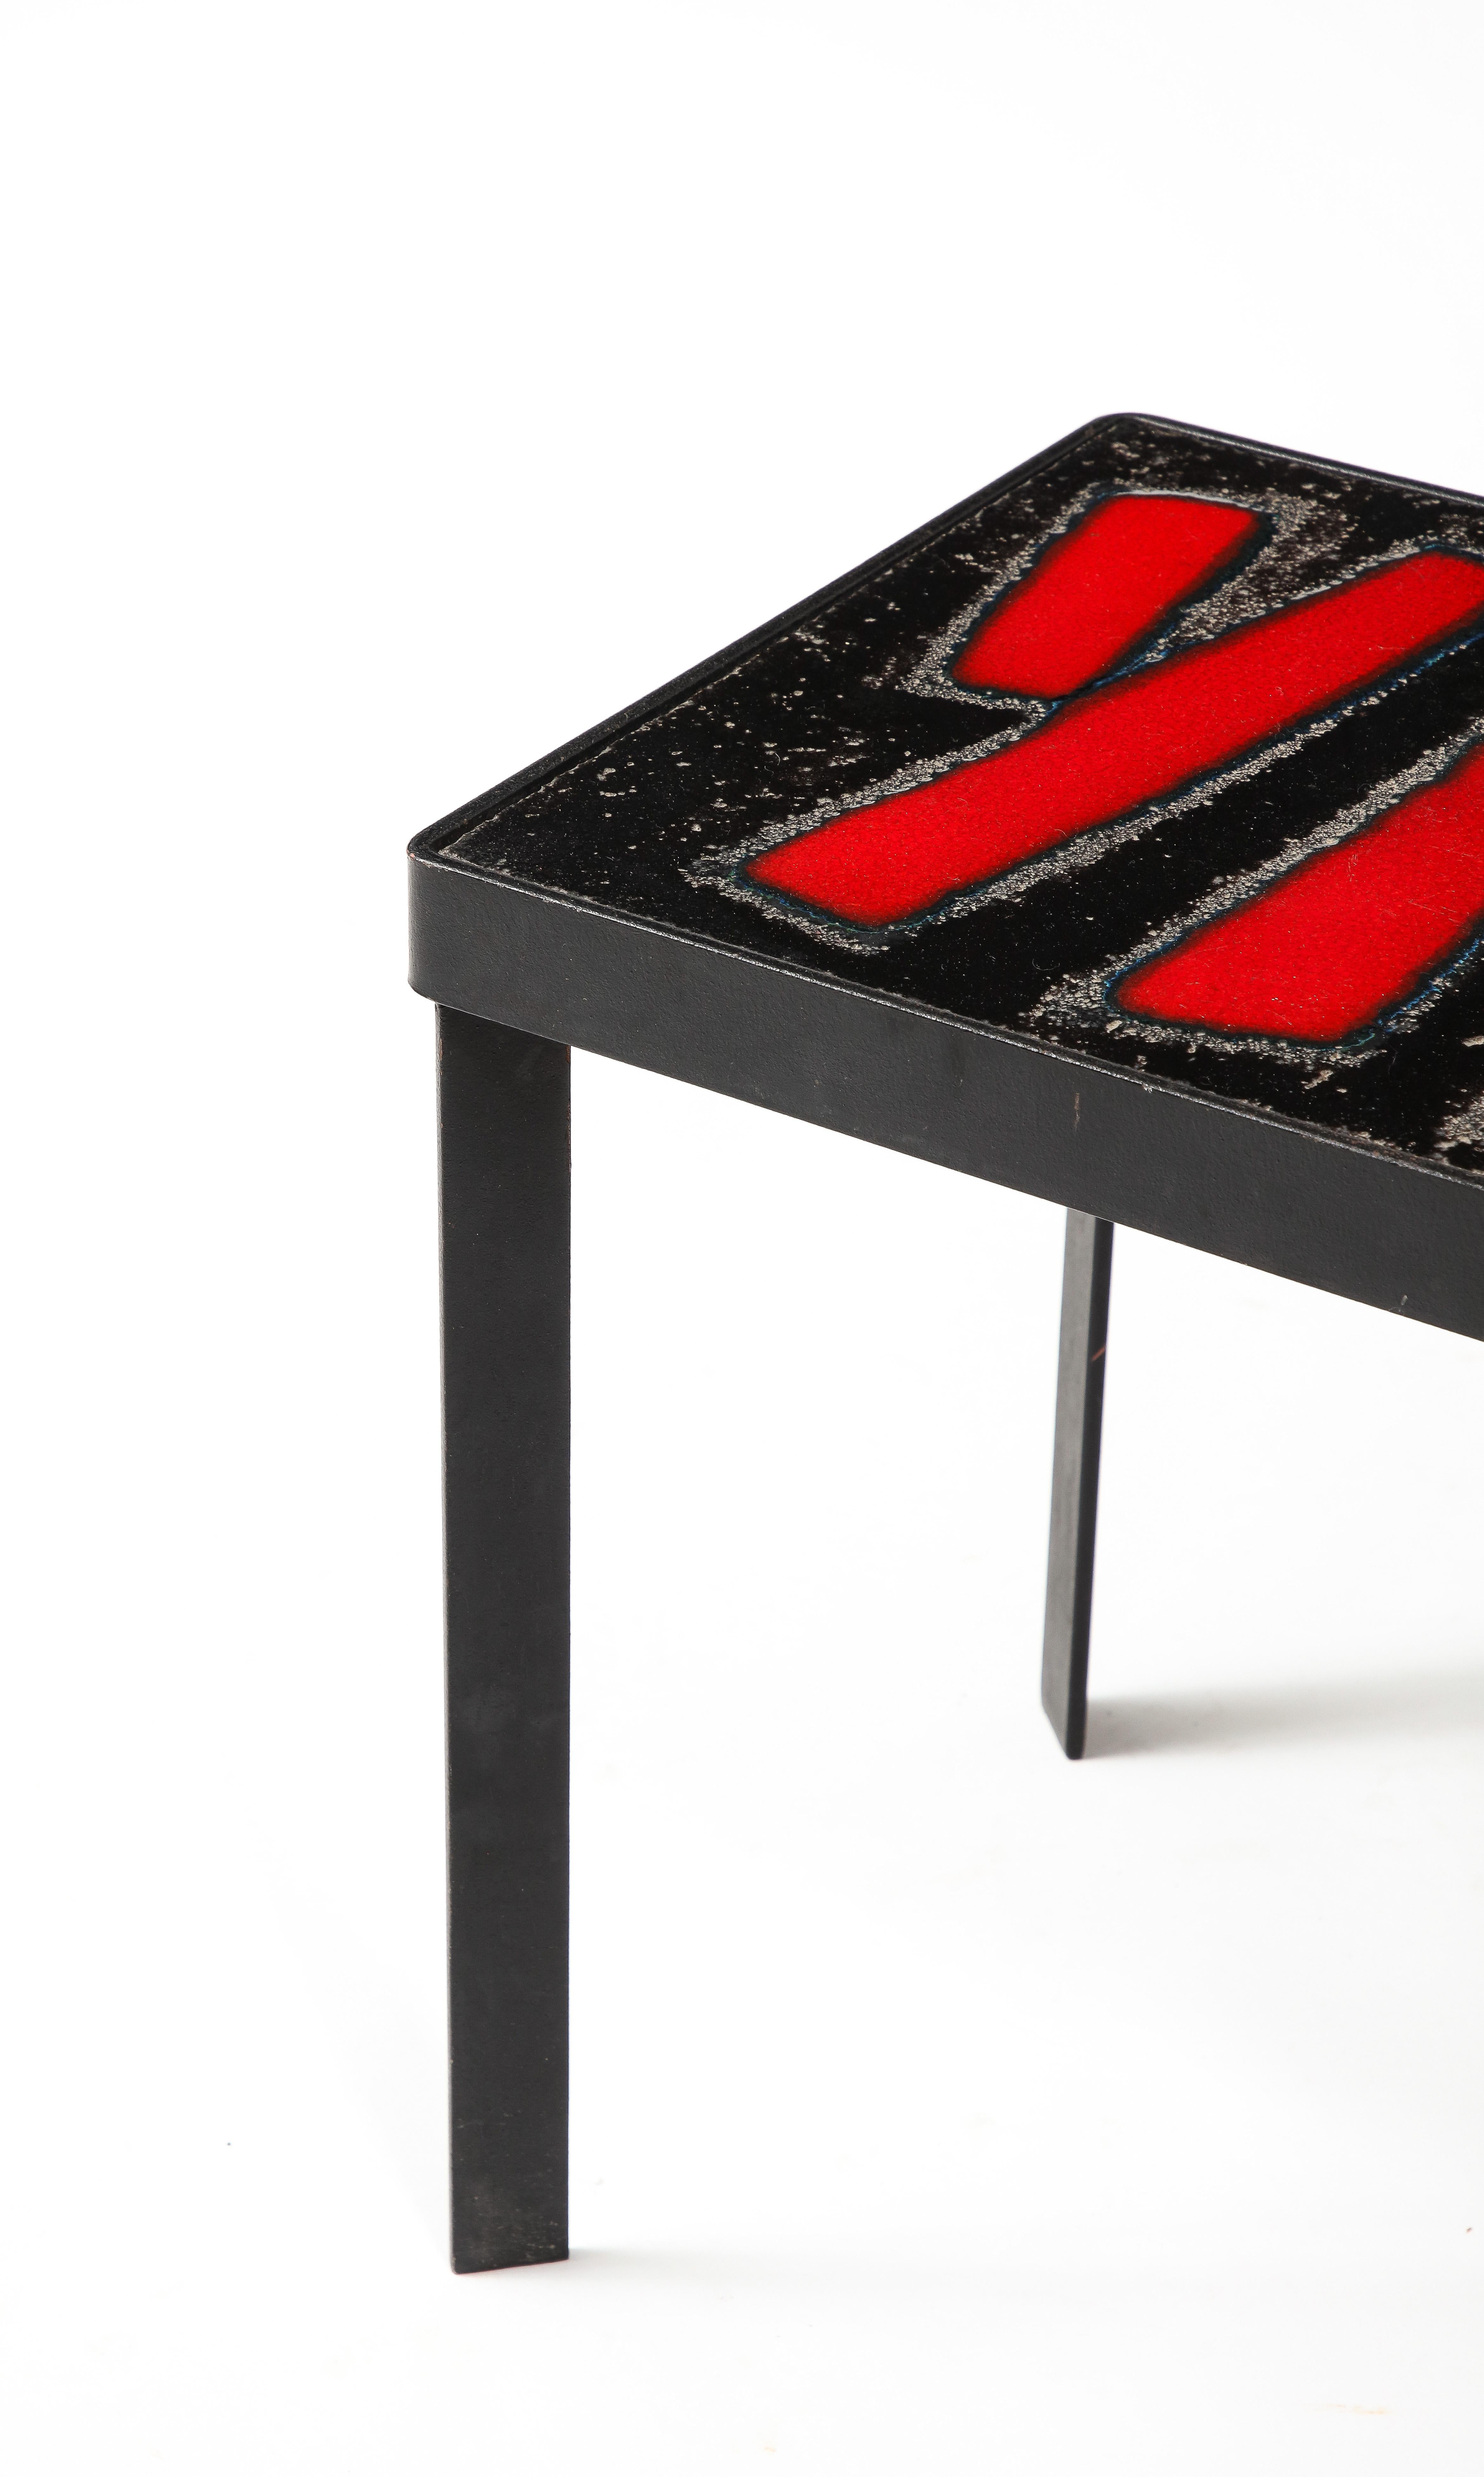 Striking Nesting tables in red enameled lava stone, blackened steel bases with canted legs.